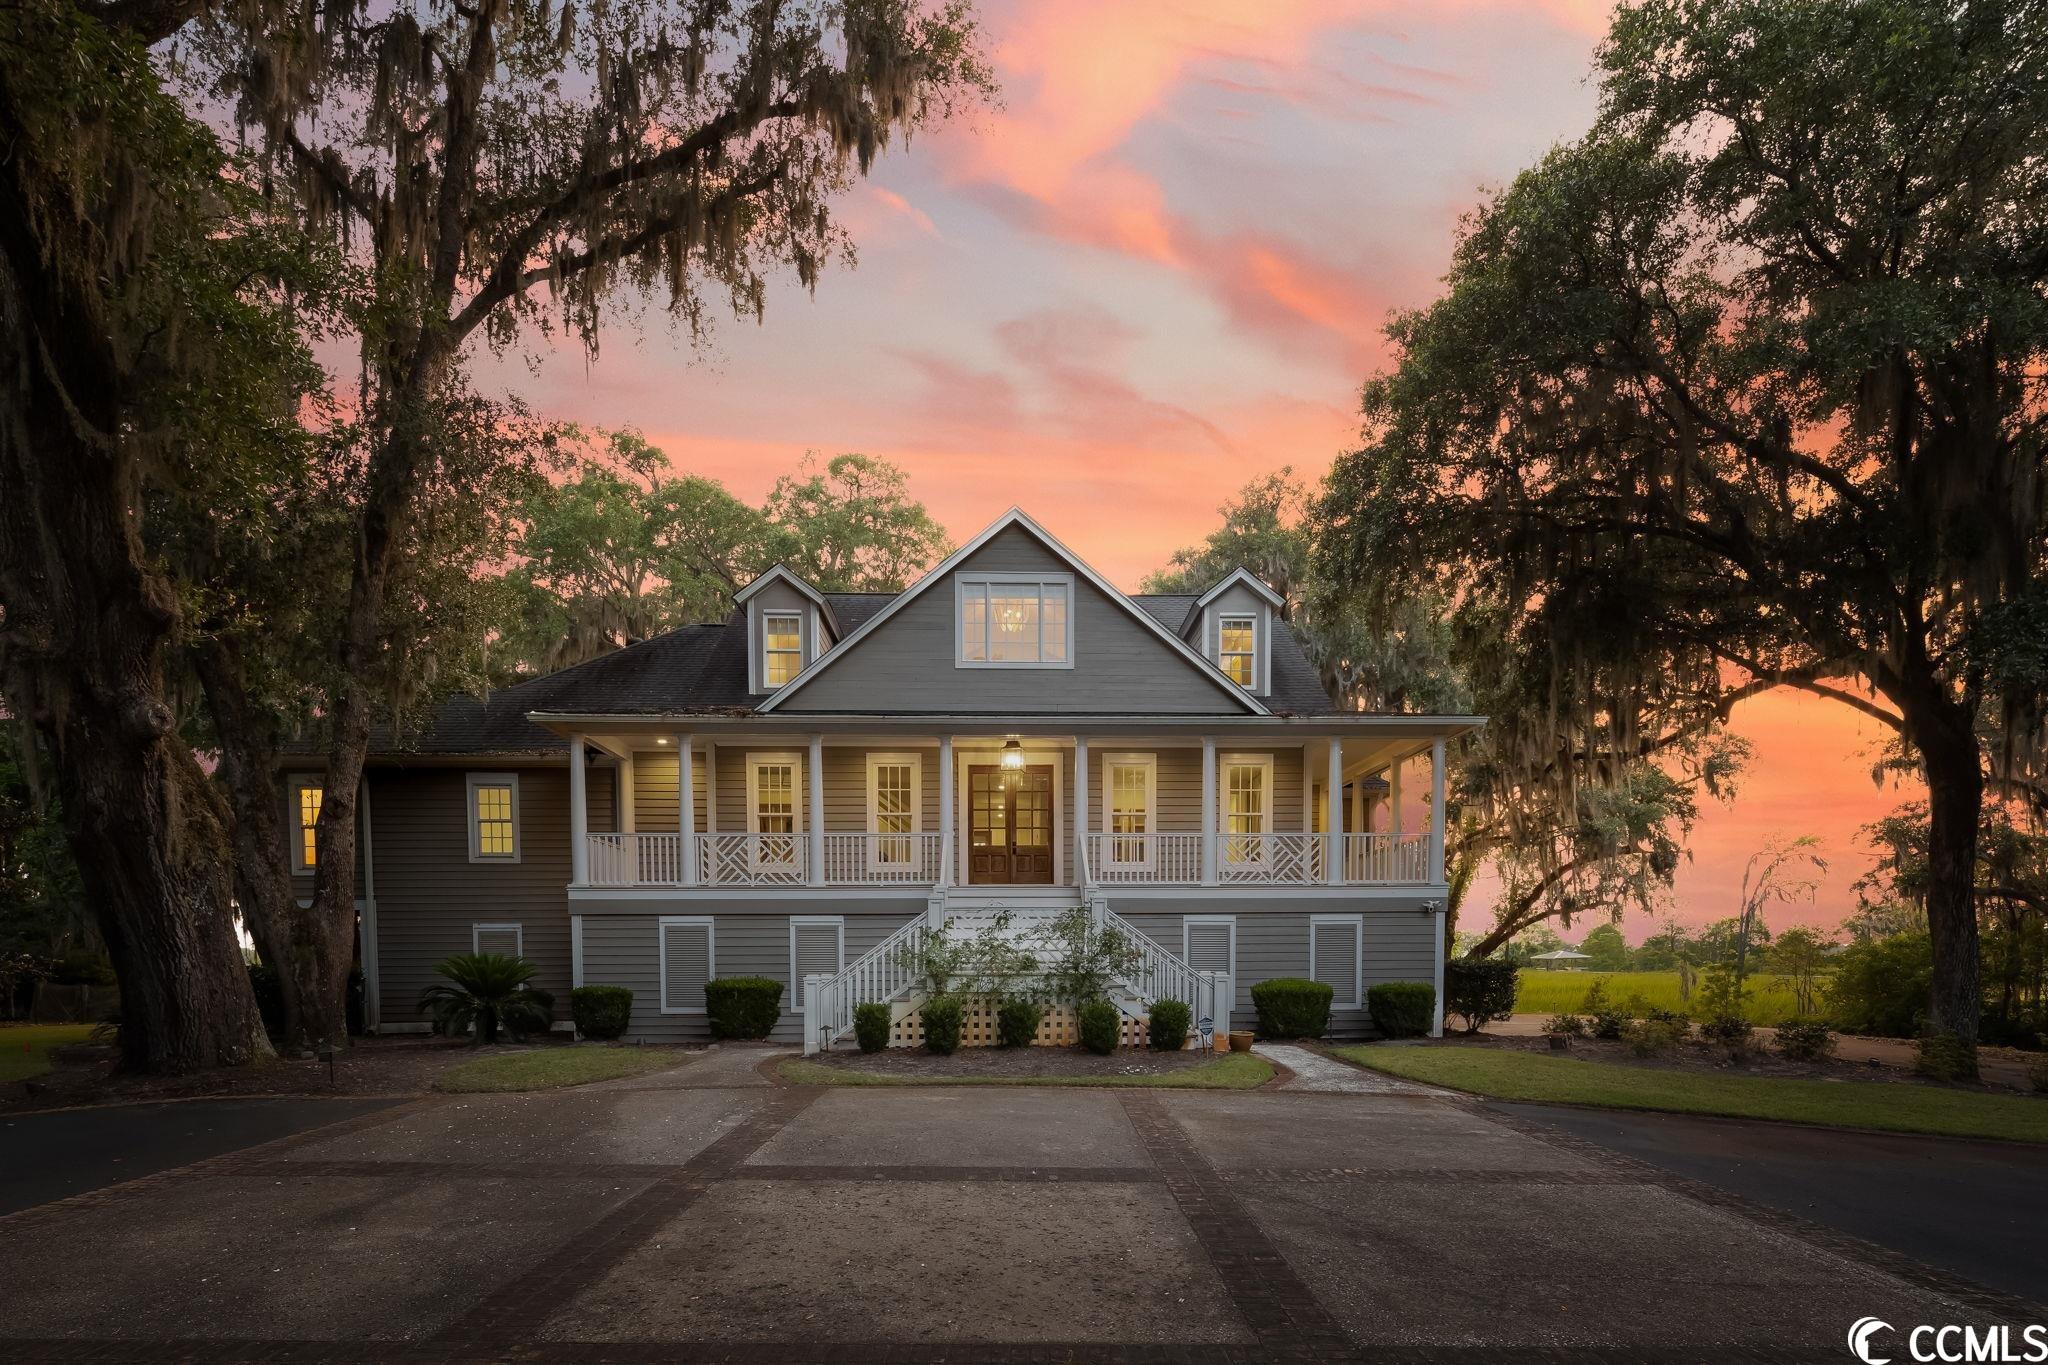 incredible southern low country home in pawleys island offering breathtaking sunsets and a charming ambiance! as you approach the property, you are greeted by a picturesque driveway lined with classic live oak trees adorned in spanish moss. the grandeur continues with a large wrap-around front porch that invites you to the double front doors. stepping into the foyer, your eyes are immediately drawn to the magnificent view of the beautiful waccamaw river. to the right, you'll find a well-lit home office, providing an ideal workspace. straight ahead from the foyer is the spacious living room, featuring a fascinating custom oyster shell fireplace as its centerpiece. through the large paned glass doors from the living room, you enter the carolina room. this room is adorned with heartwood pine on the ceiling and floor-to-ceiling windows, offering yet another opportunity to revel in the stunning views. the carolina room is spacious enough to accommodate a dining table, providing a perfect setting for meals. throughout the main level, you'll find heartwood pine flooring, enhancing the home's charm and warmth. connected to the carolina room is a roomy screened porch, allowing you to enjoy the outdoors comfortably. the chef's kitchen is a culinary enthusiast's dream, equipped with double ovens, a wolf cooktop with a vented hood, a subzero refrigerator, two sinks, two dishwashers, stainless steel appliances, granite and stainless-steel countertops. the kitchen also boasts beautiful custom cabinets, featuring a built-in glass china closet and built-in shelving. a work island with a sink and breakfast bar adds further functionality to the space. the spacious master bedroom serves as a peaceful hideaway, offering ample room for a cozy sitting area. it includes a custom walk-in closet and french doors that open to a private screened porch, providing yet another tranquil retreat. the master bathroom is nothing short of a dream, featuring a soaking tub, a custom tiled walk-in shower with multiple shower heads, and separate his and her vanity areas with water closets. moving upstairs, you'll discover three bedrooms, two bathrooms, and a bonus room area that can serve as a craft room or playroom, catering to your specific needs. on the bottom level, there is a full (mother-in-law) apartment, completely updated and equipped with a full kitchen, living room, bedroom, laundry, and bathroom. additionally, downstairs features a separate and private home office with stunning views of the waterway. extra amenities include an elevator for convenient access to all levels, automatic roll-up screens on sunroom windows, an outdoor firepit, and a private creek dock leading to the river. for a comprehensive overview of all the upgrades, please consult your agent.